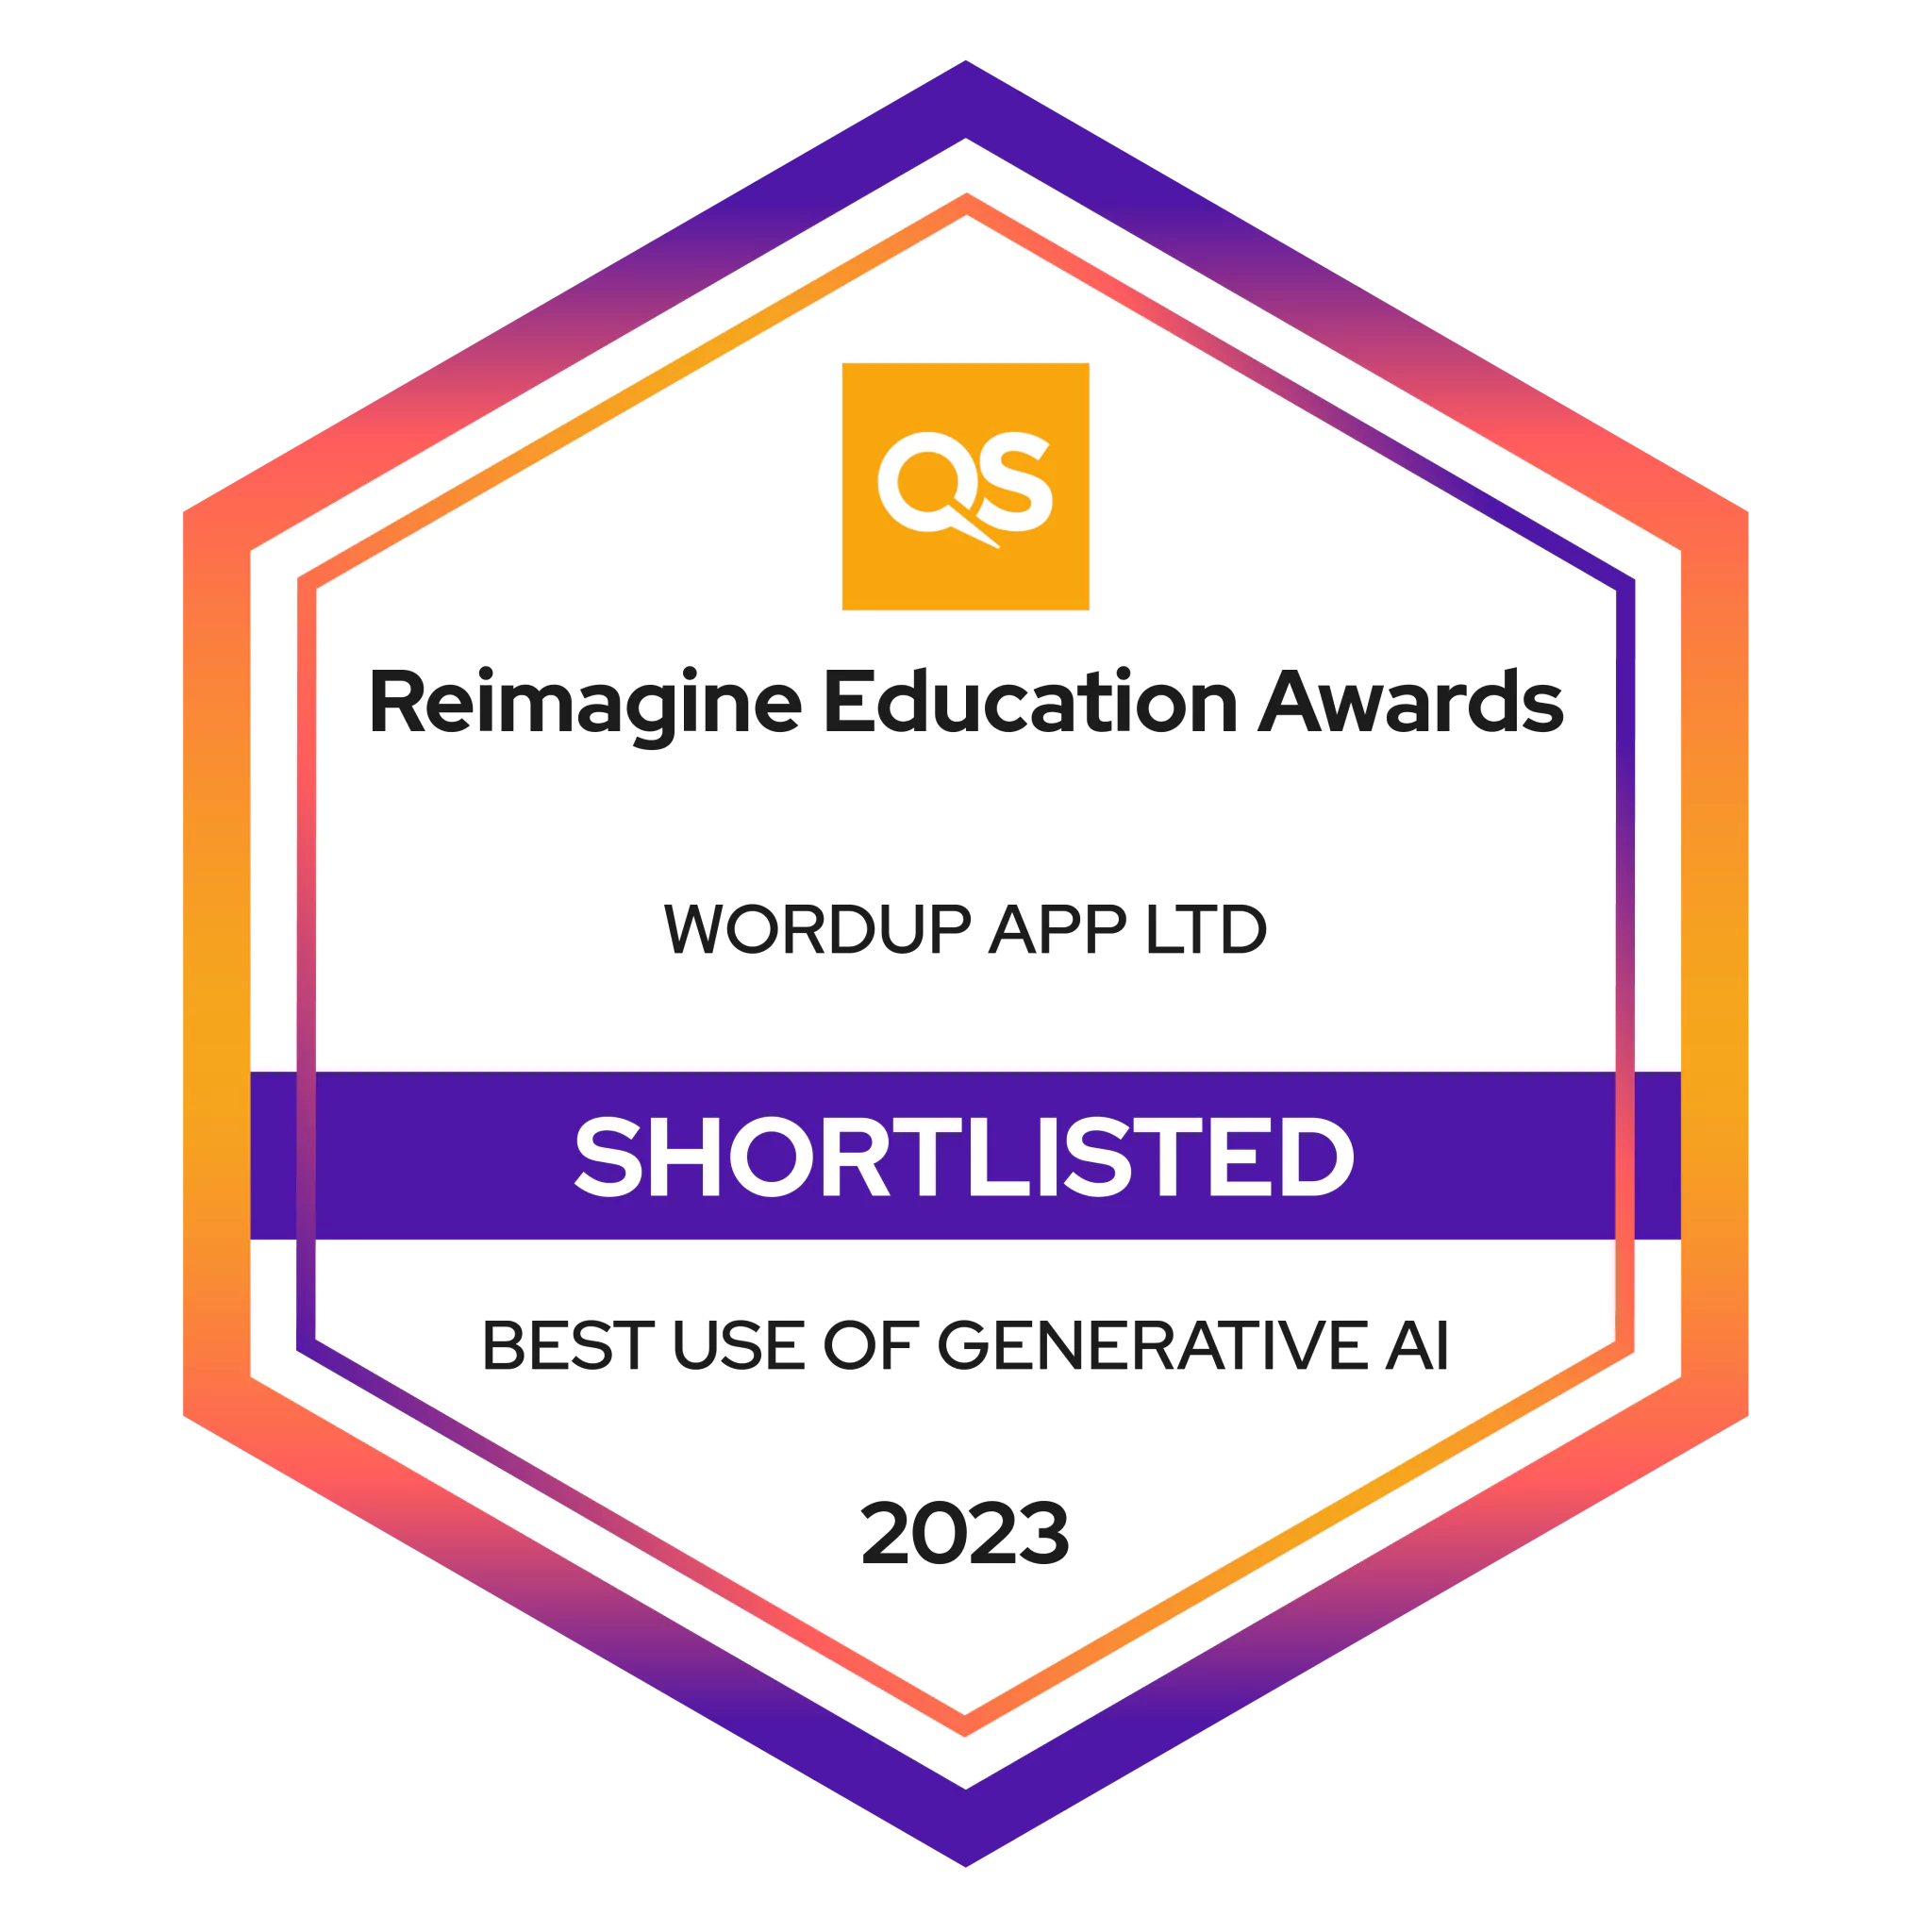 2023 Reimagine Education Awards: shortlisted for the Best Use of Generative AI Award